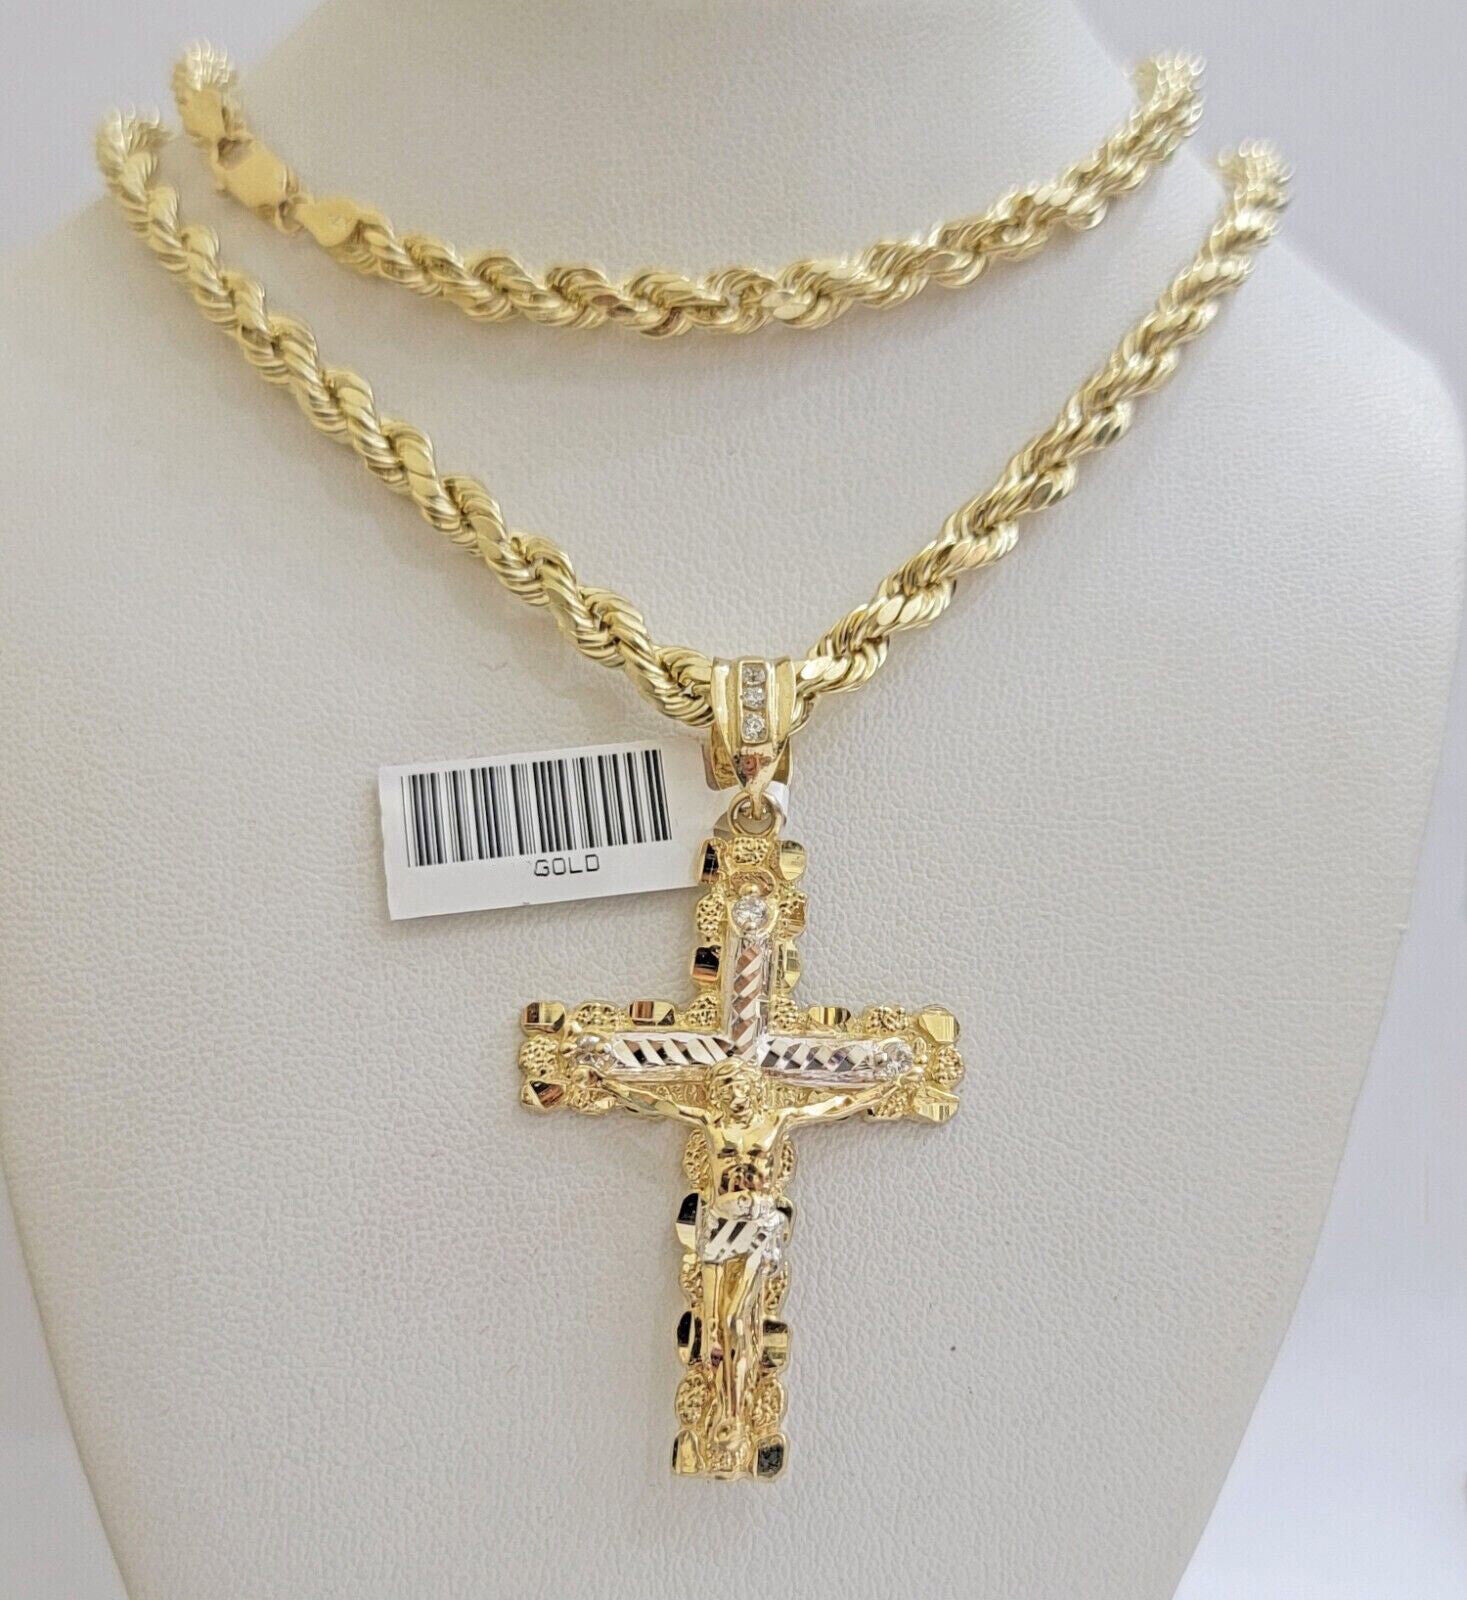 Real 10k Gold Rope Chain 18 inch & Jesus Cross Charm Pendant Set 5mm Necklace